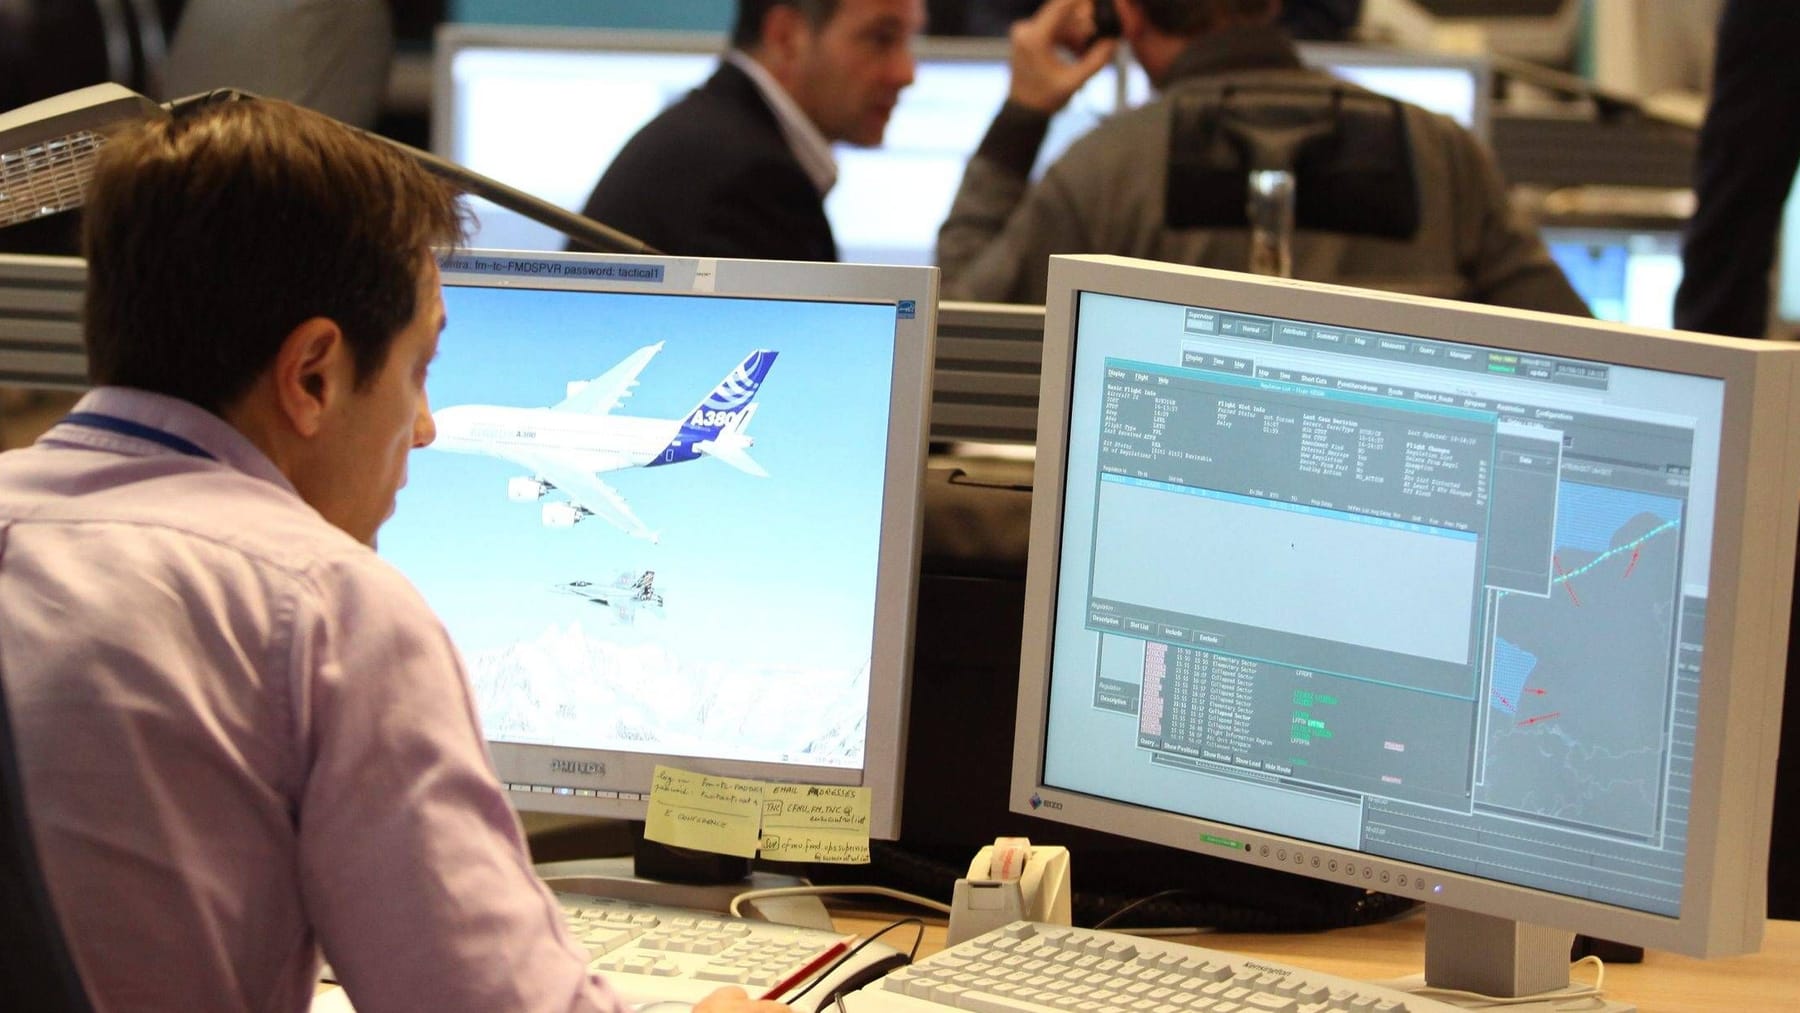 Apparently from Russia: Hacker Attack on Aviation Authority